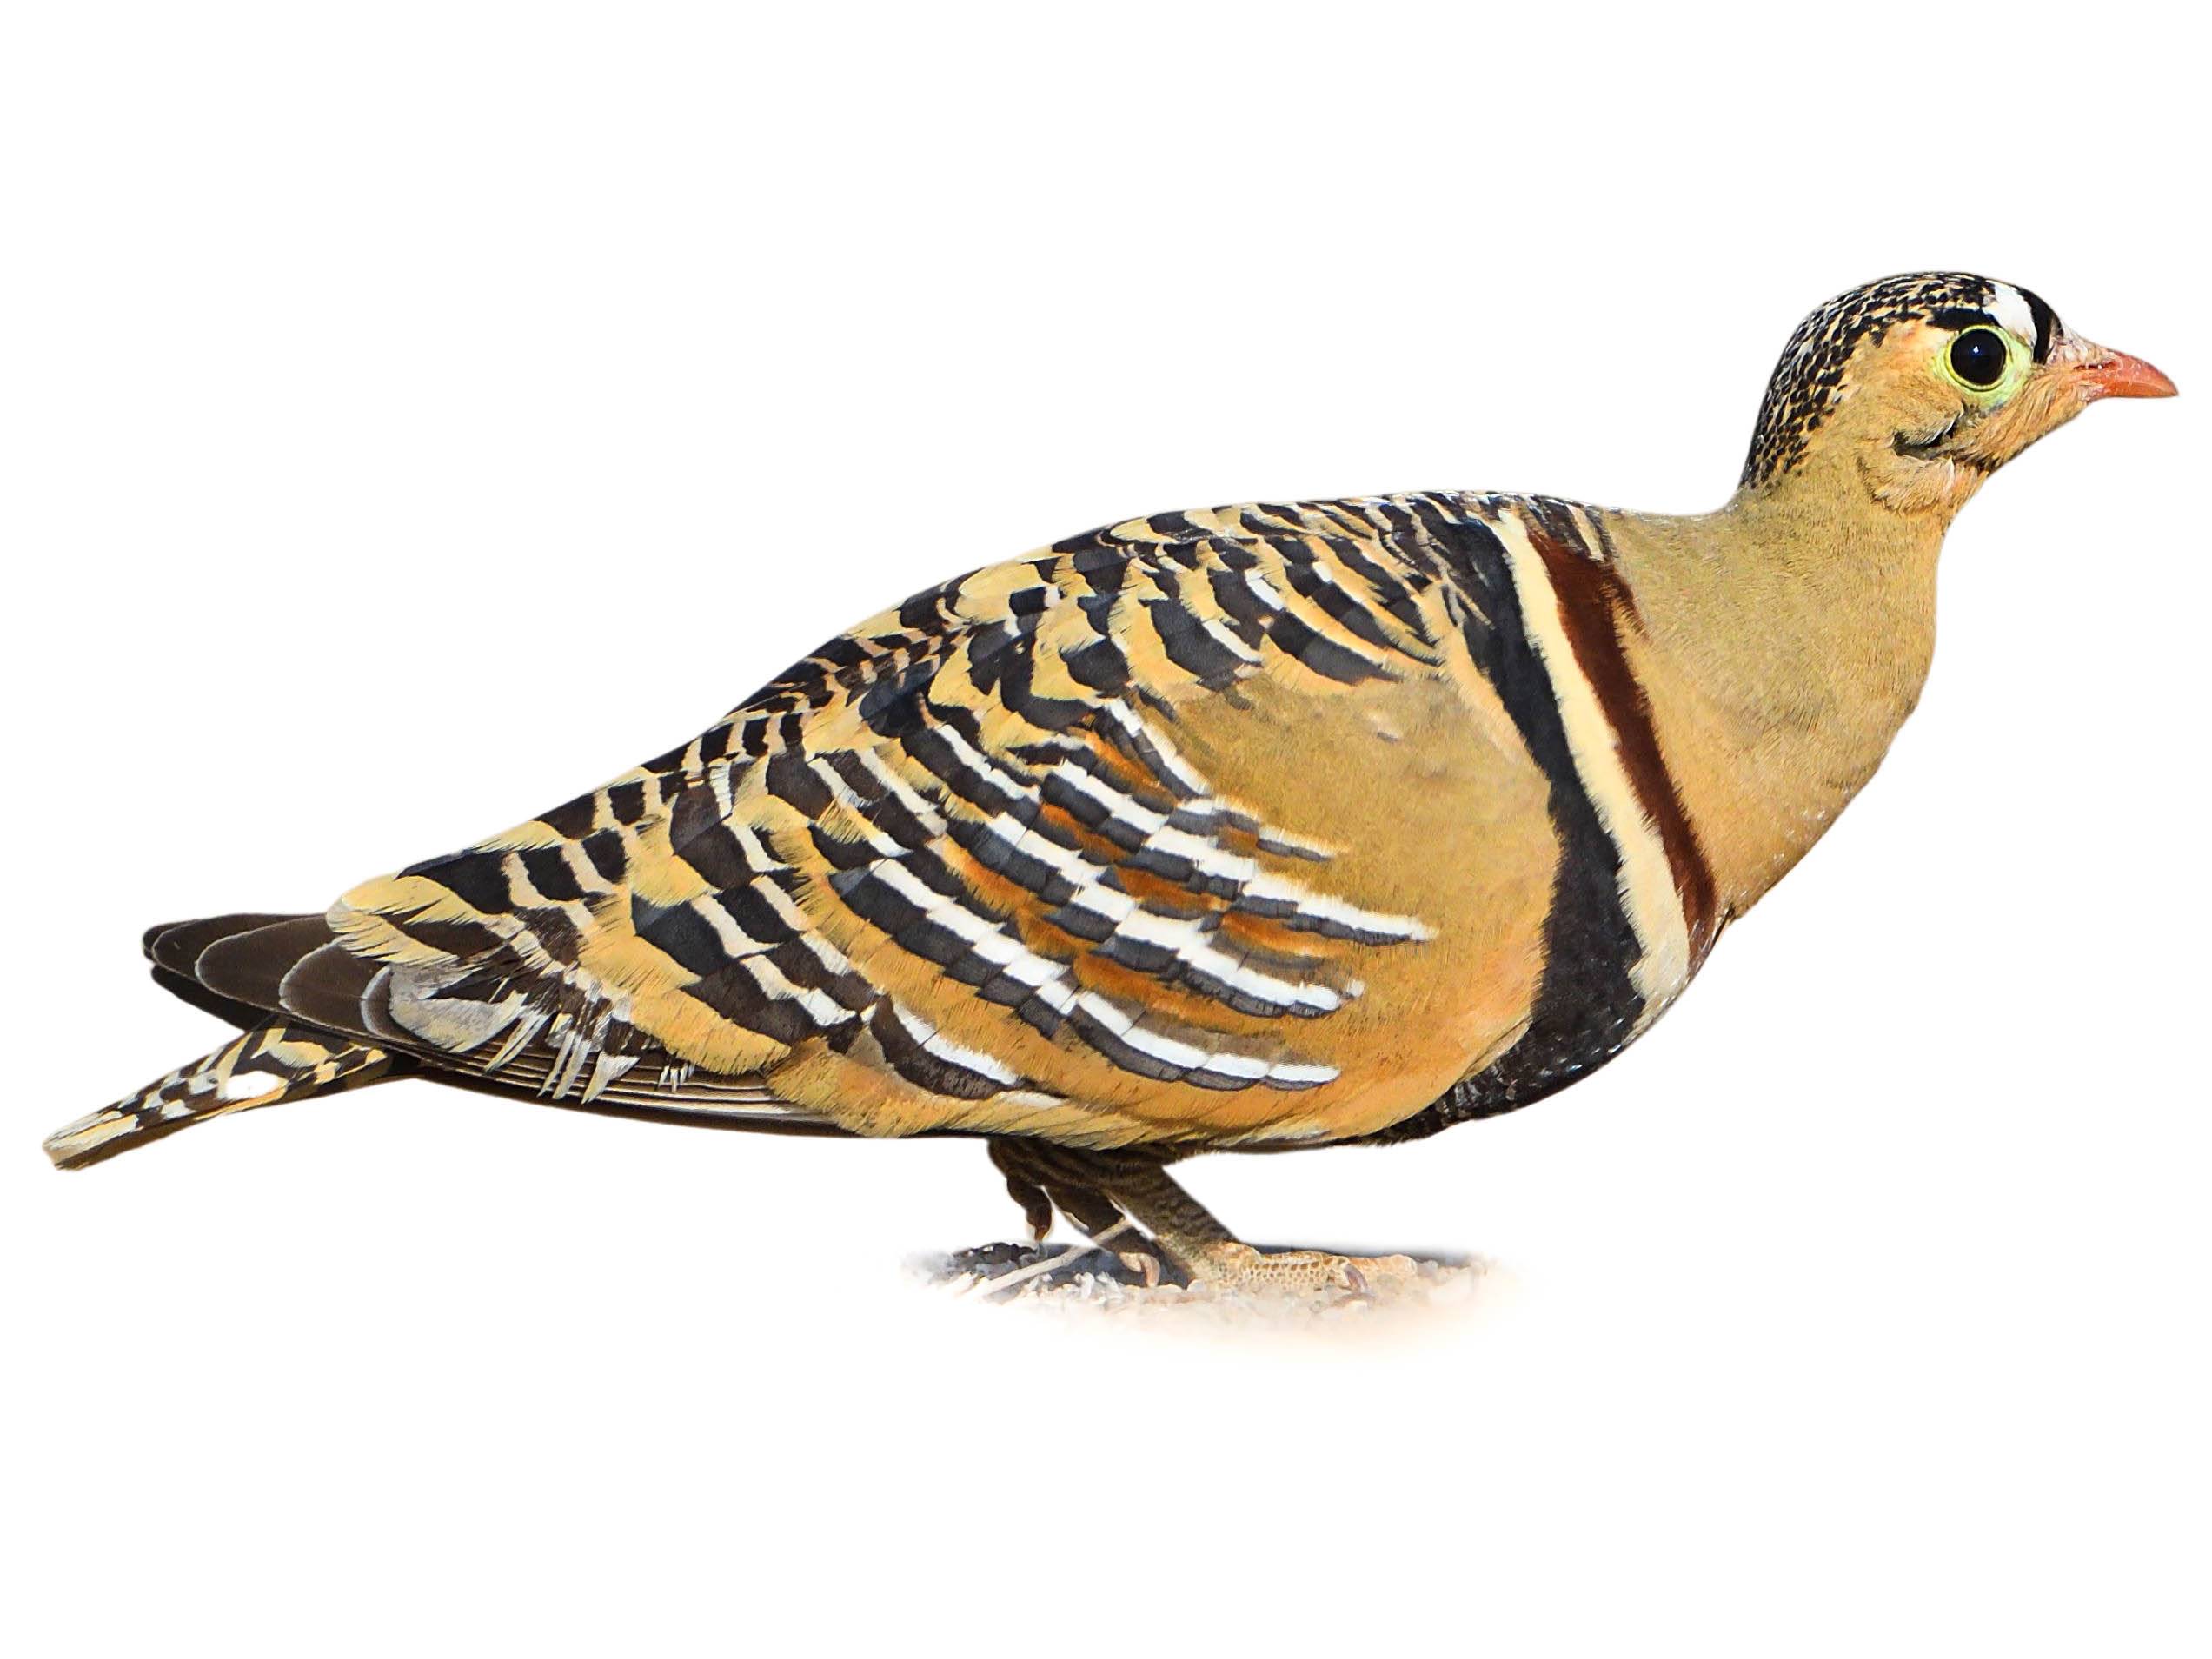 A photo of a Painted Sandgrouse (Pterocles indicus), male